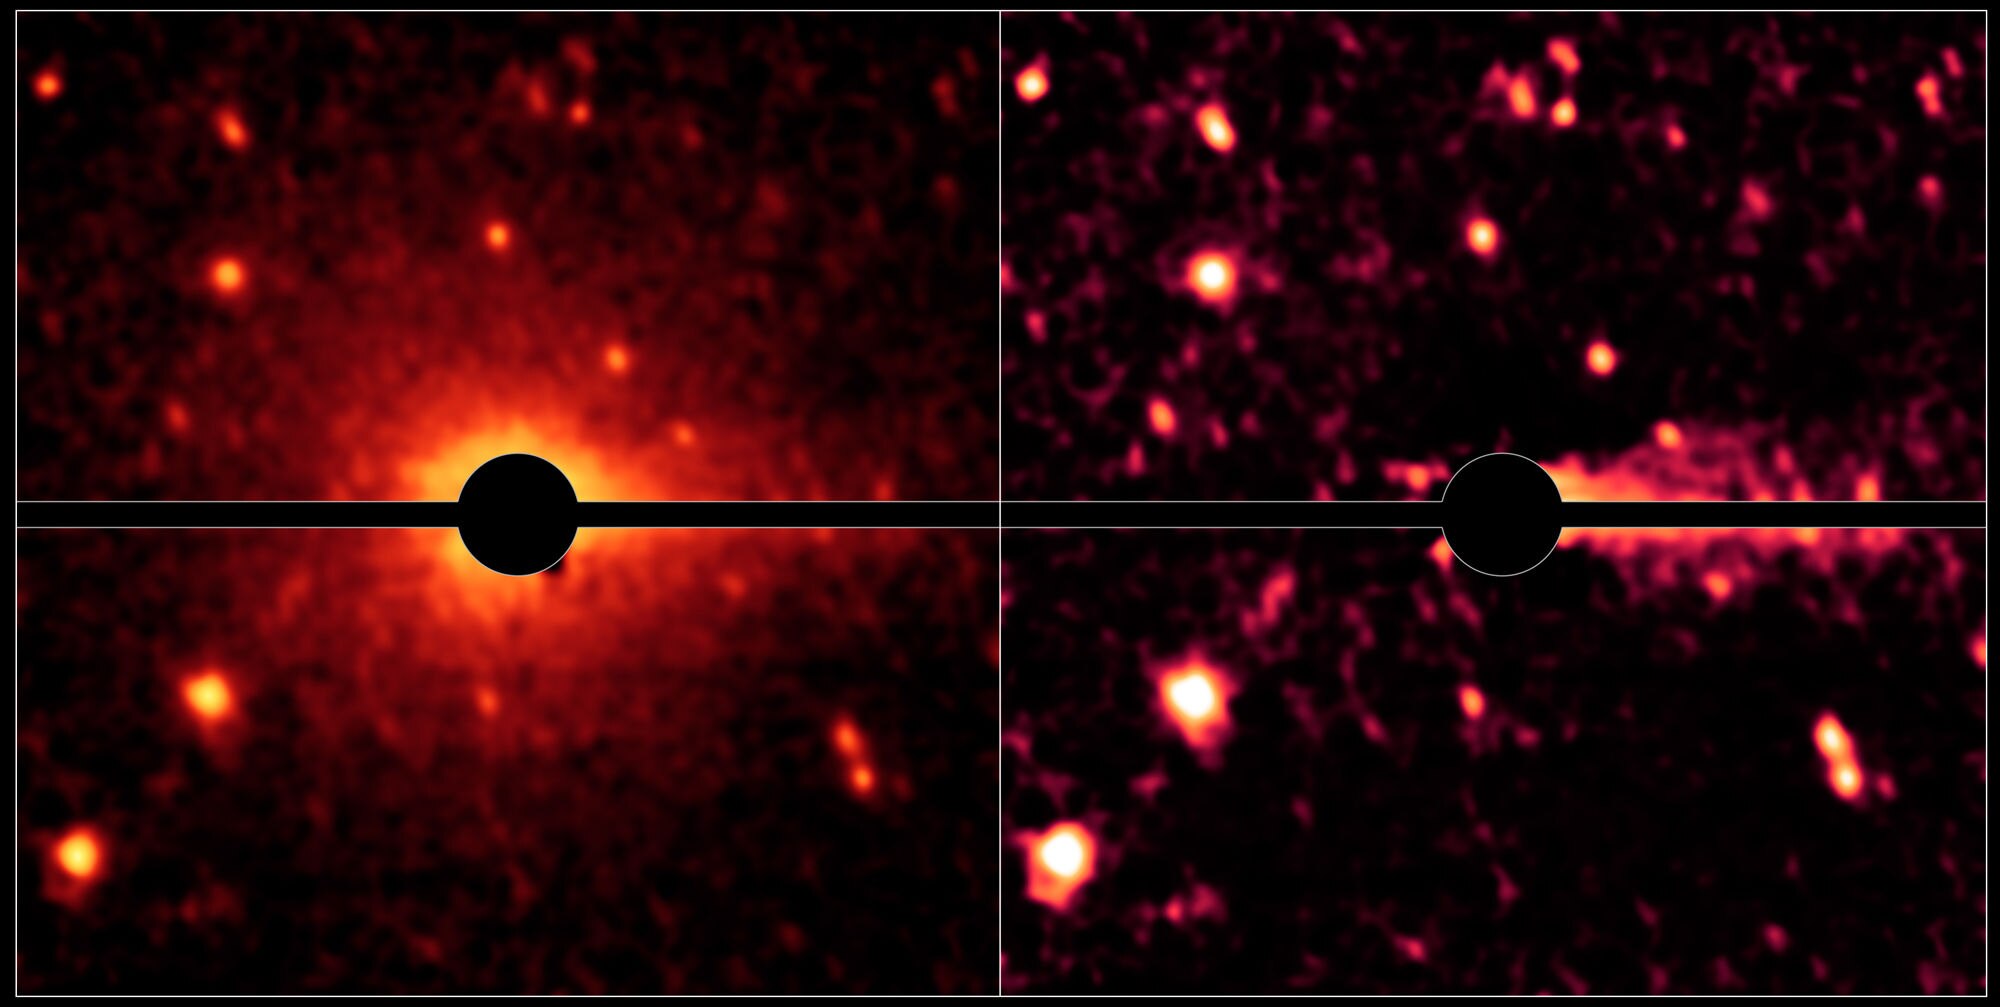 The not-quite-dead comet Don Quixote. Using a disk inside the telescope to block the brightest part of the object allows the fainter coma to shine through (left), and subtracting that reveals the even fainter cometary tail (right).